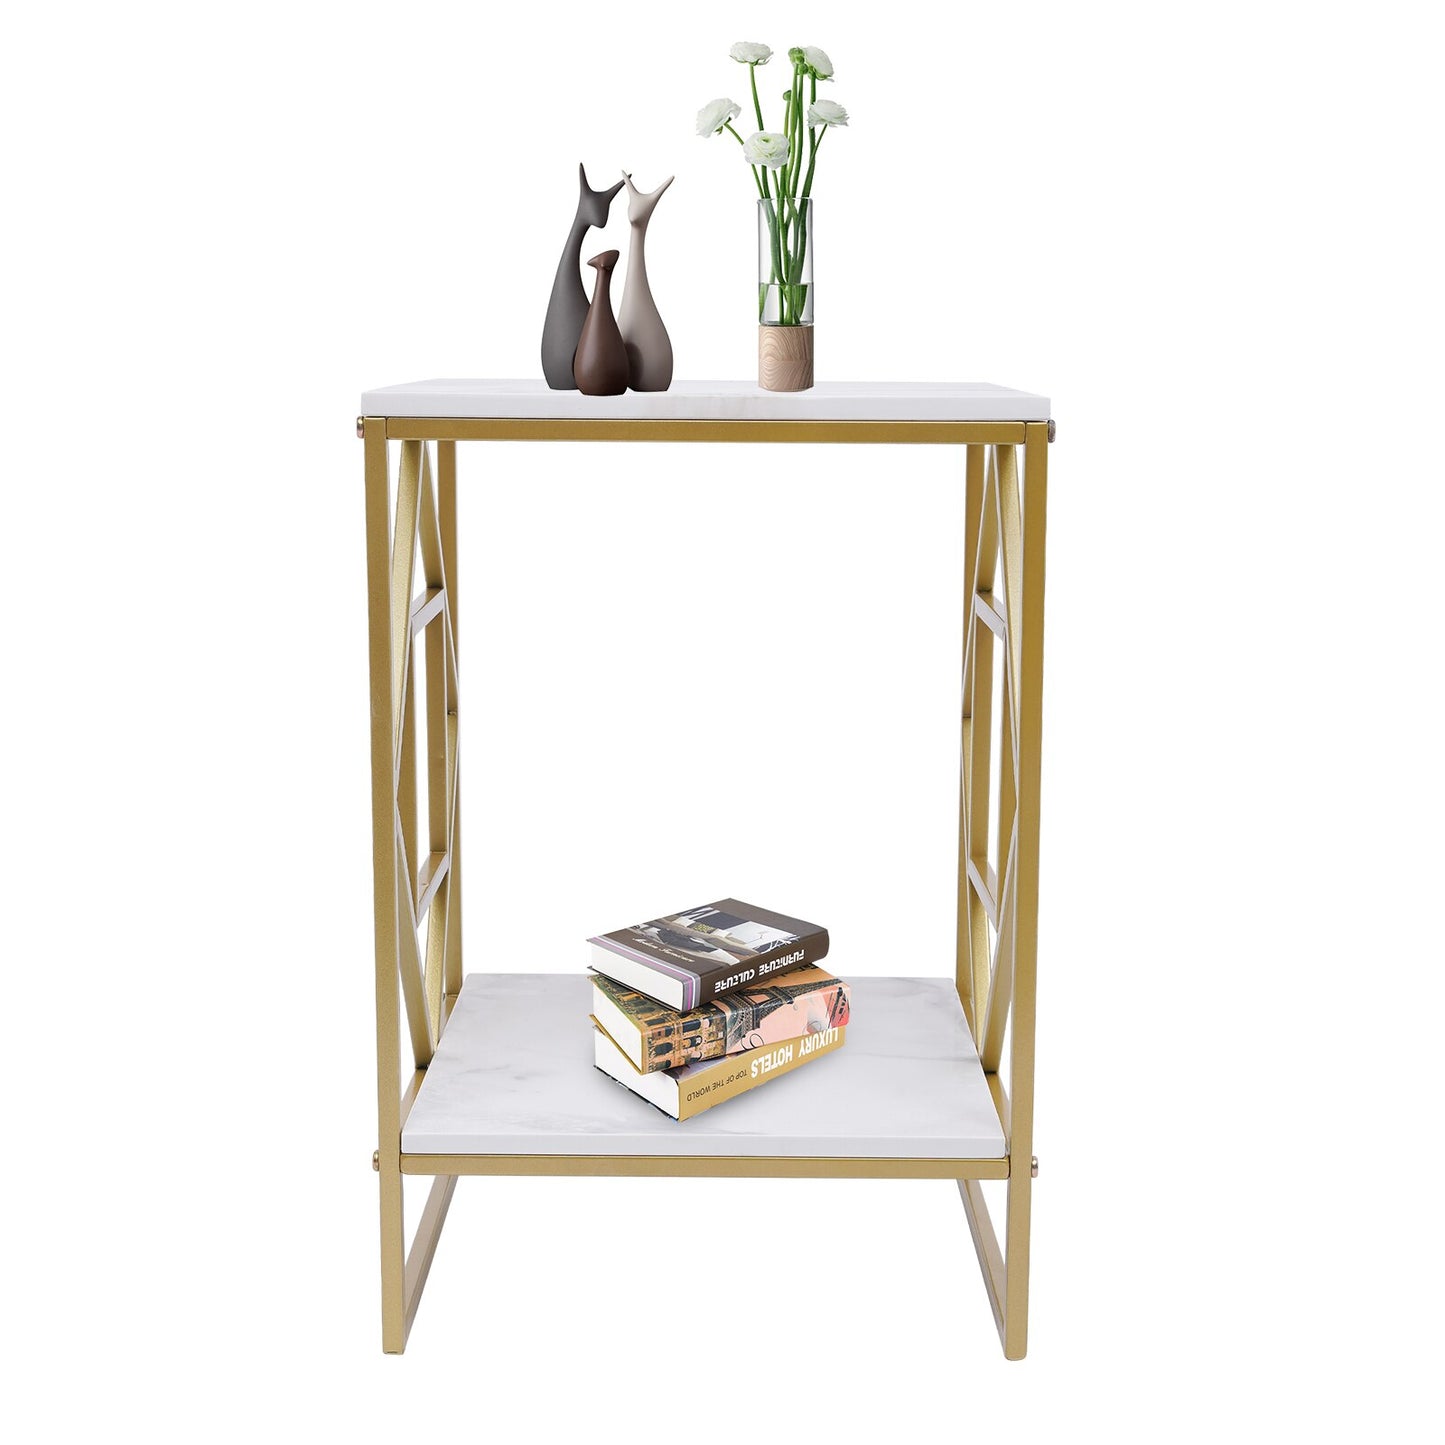 Modern Gold Painted End Table Minimalist Design End Table Tabletop Nightstand